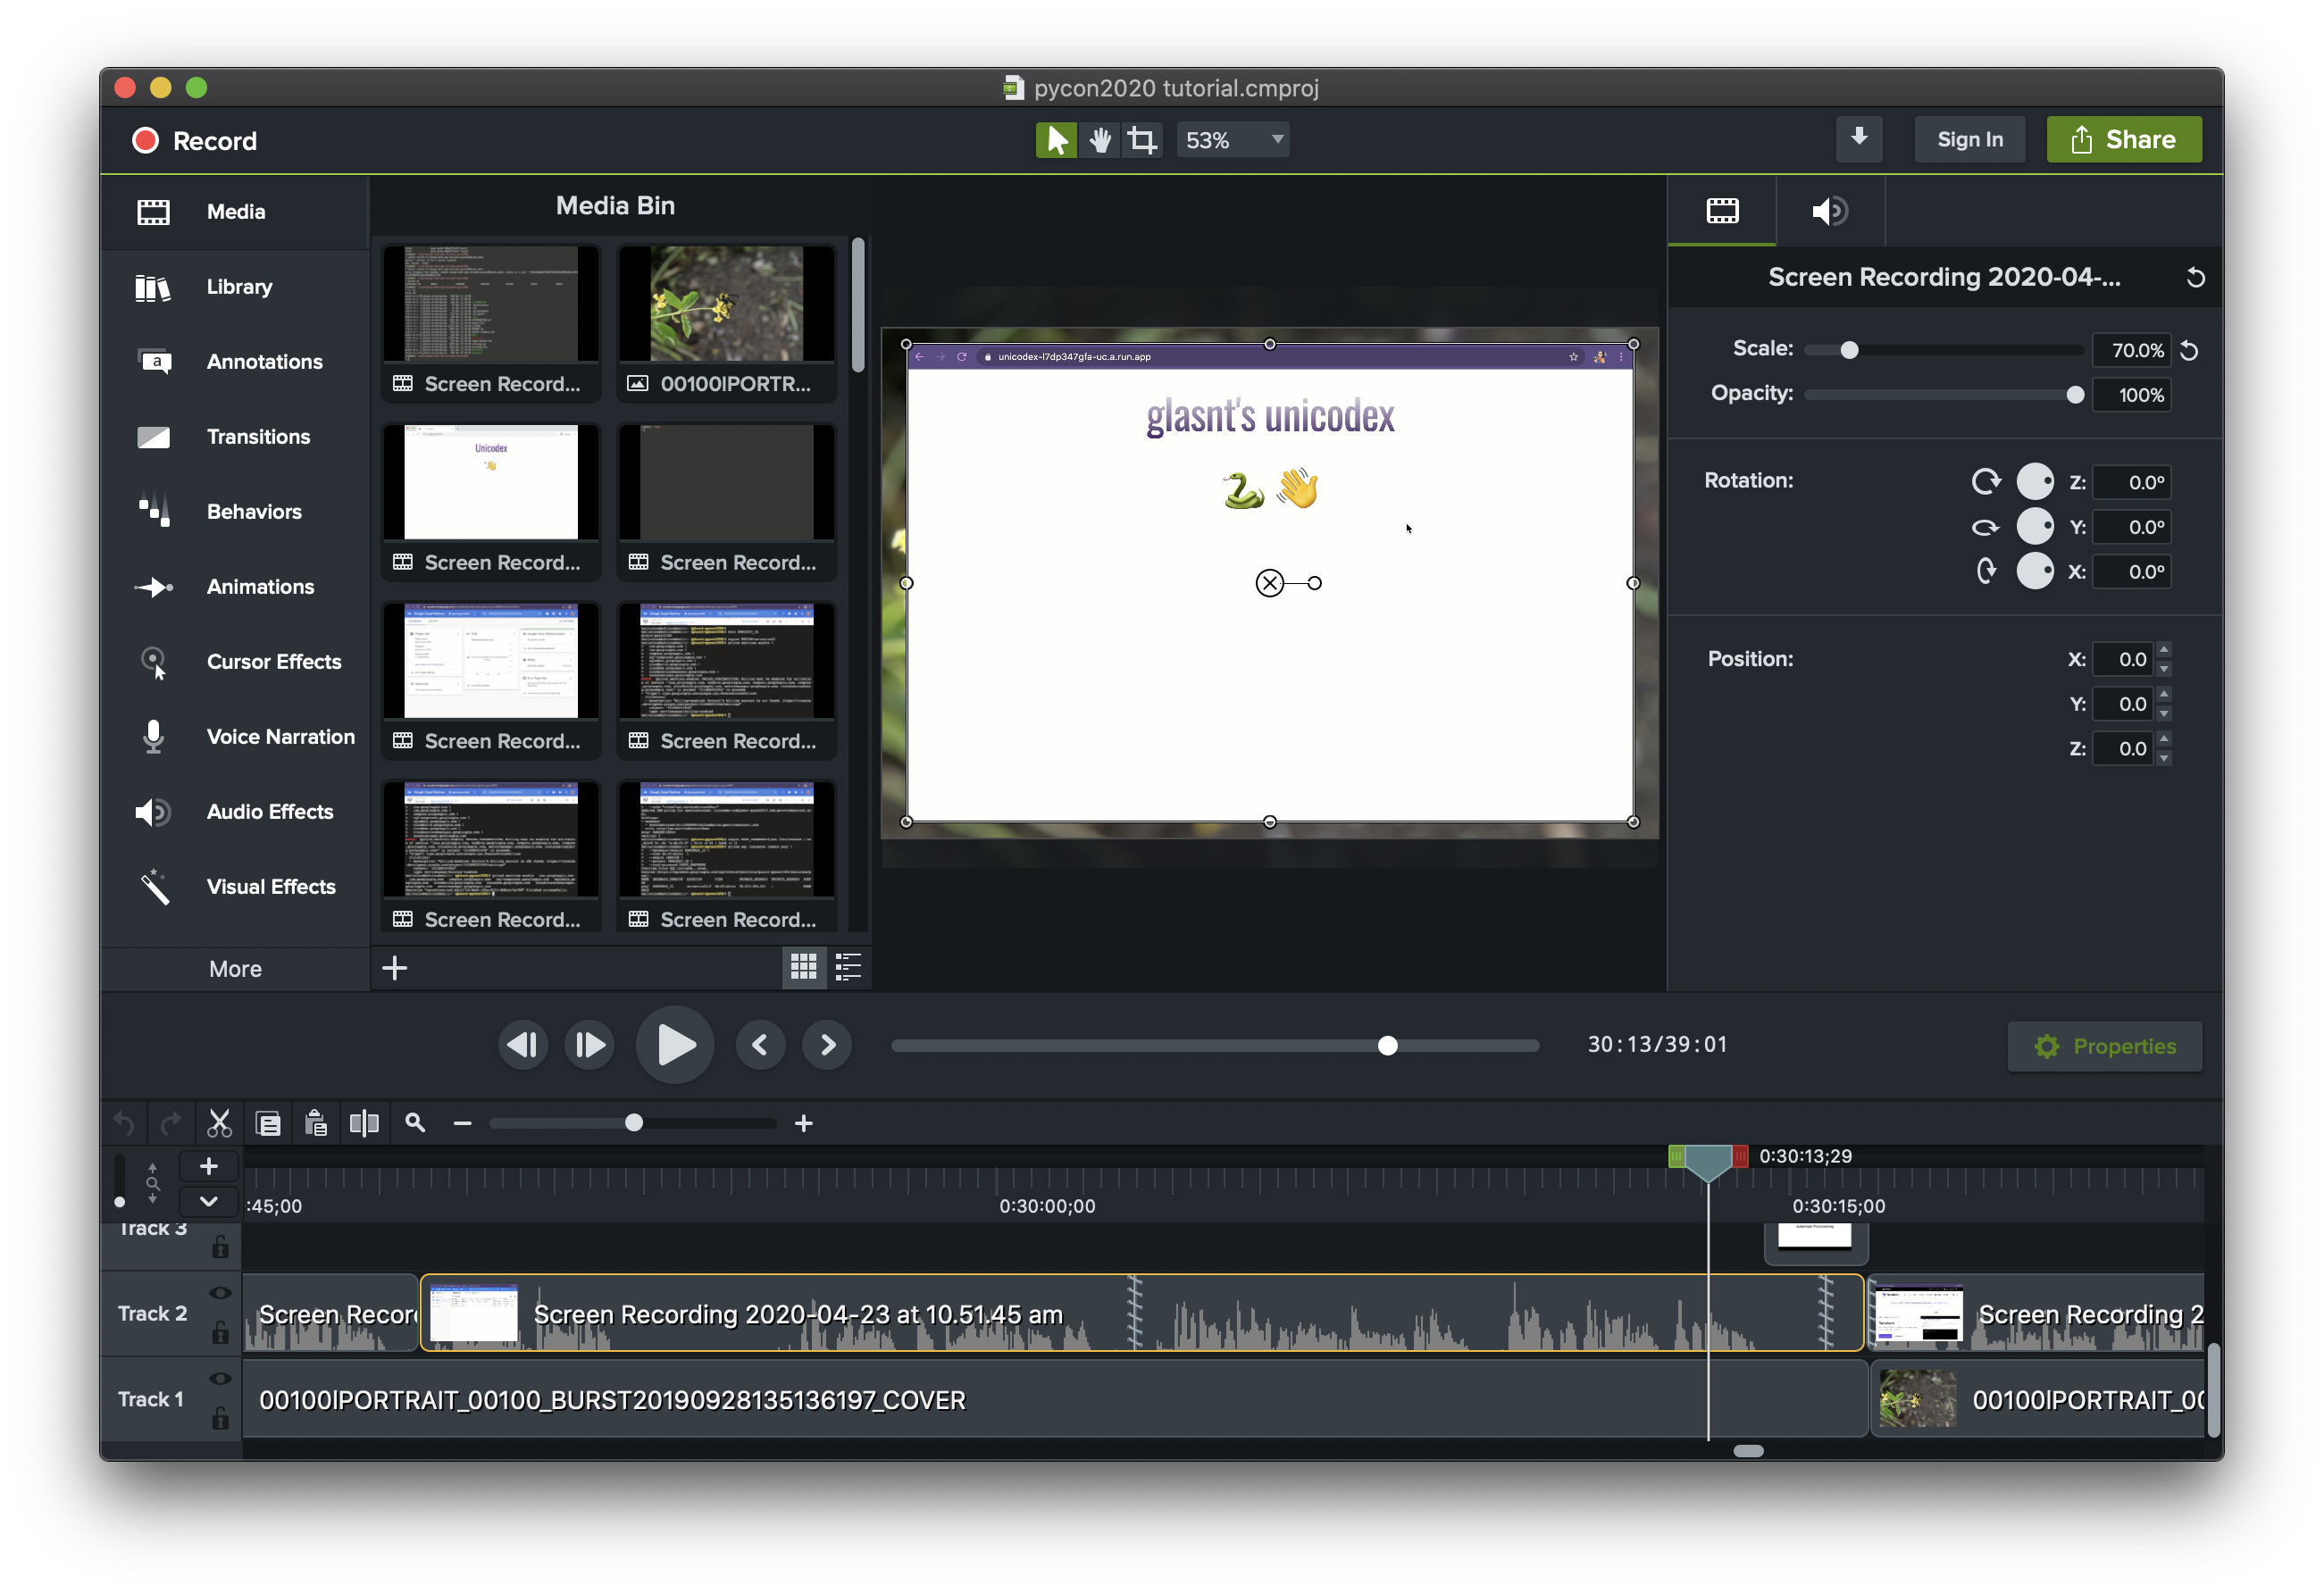 camtasia 9 download for windows 10